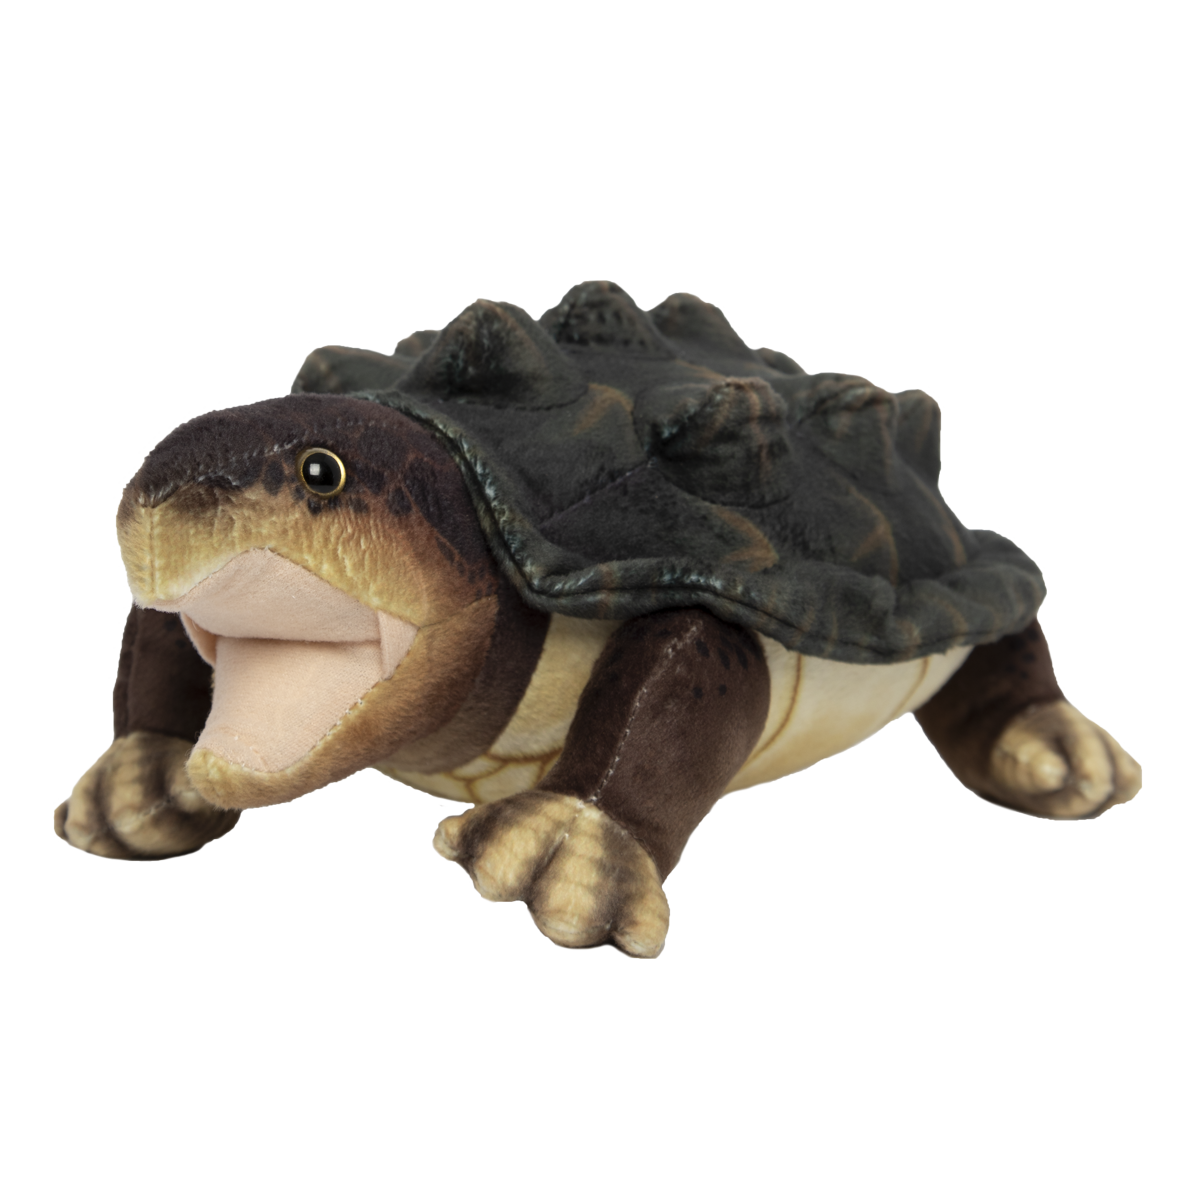 A snapping turtle plush with a brown and yellow head and feet and a green shell. 